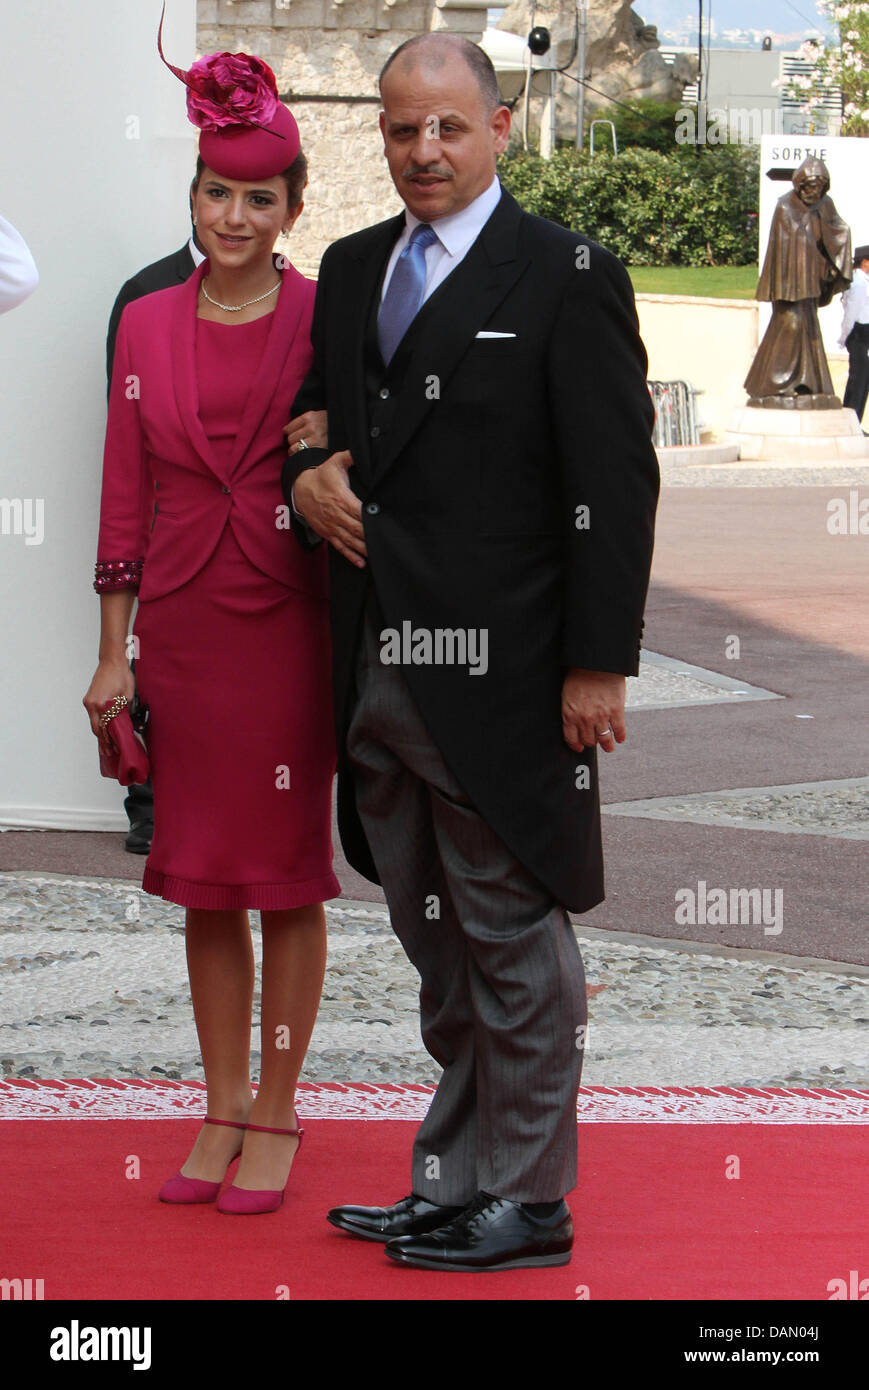 Prince Faisal bin al Hussein of Jordan arrives with his wife Sara Qabbani for the religious wedding of Prince Albert II and Princess Charlene in the Prince's Palace in Monaco, 02 July 2011. Some 3500 guests are expected to follow the ceremony in the Main Courtyard of the Palace. Photo:  A.Ph.van der Werf, Royal Press Europe Stock Photo